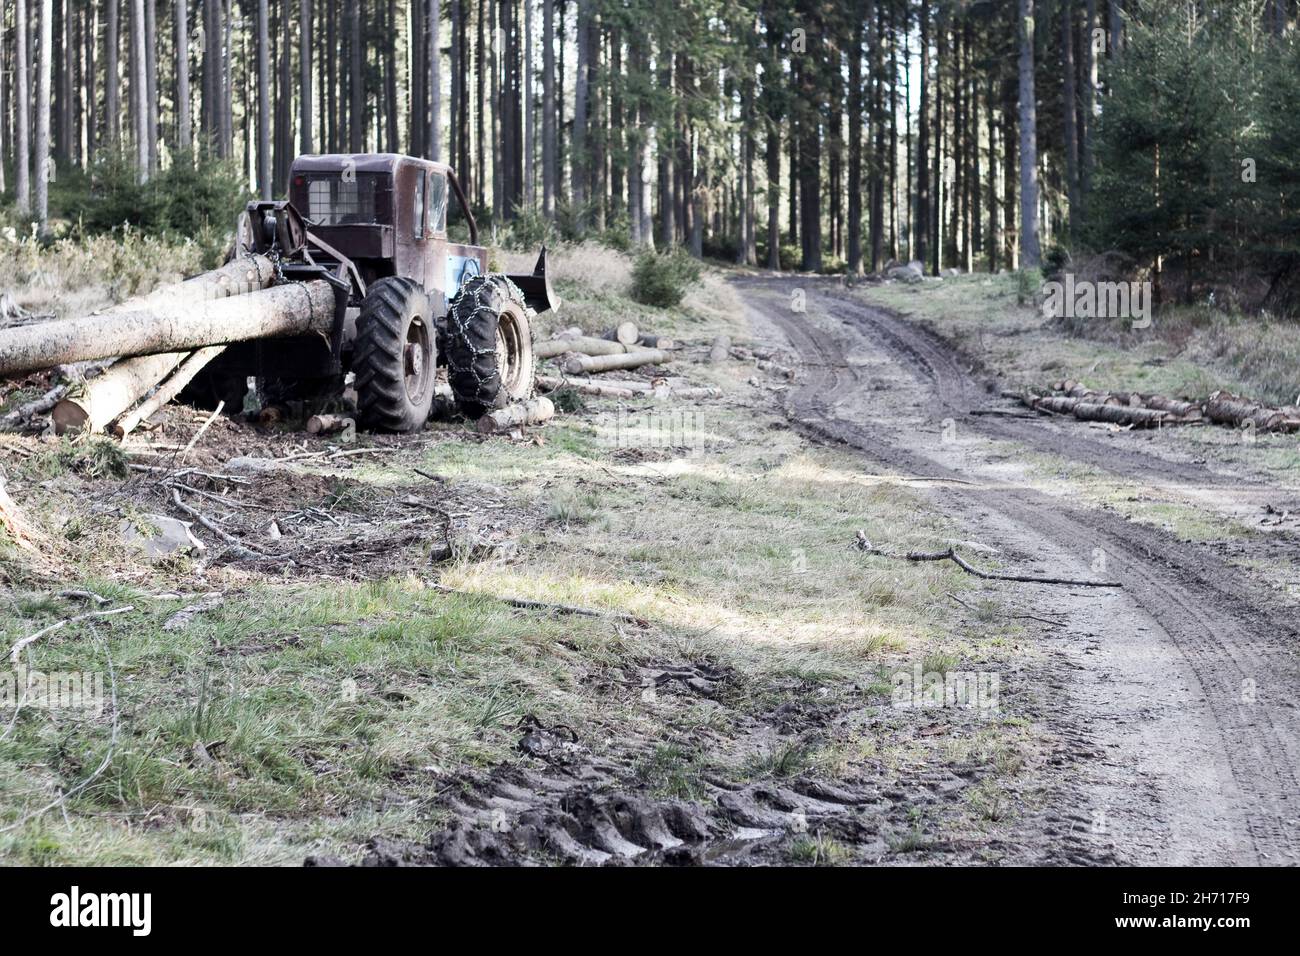 Forest tractor transporter in woods ready to drag timbers Stock Photo